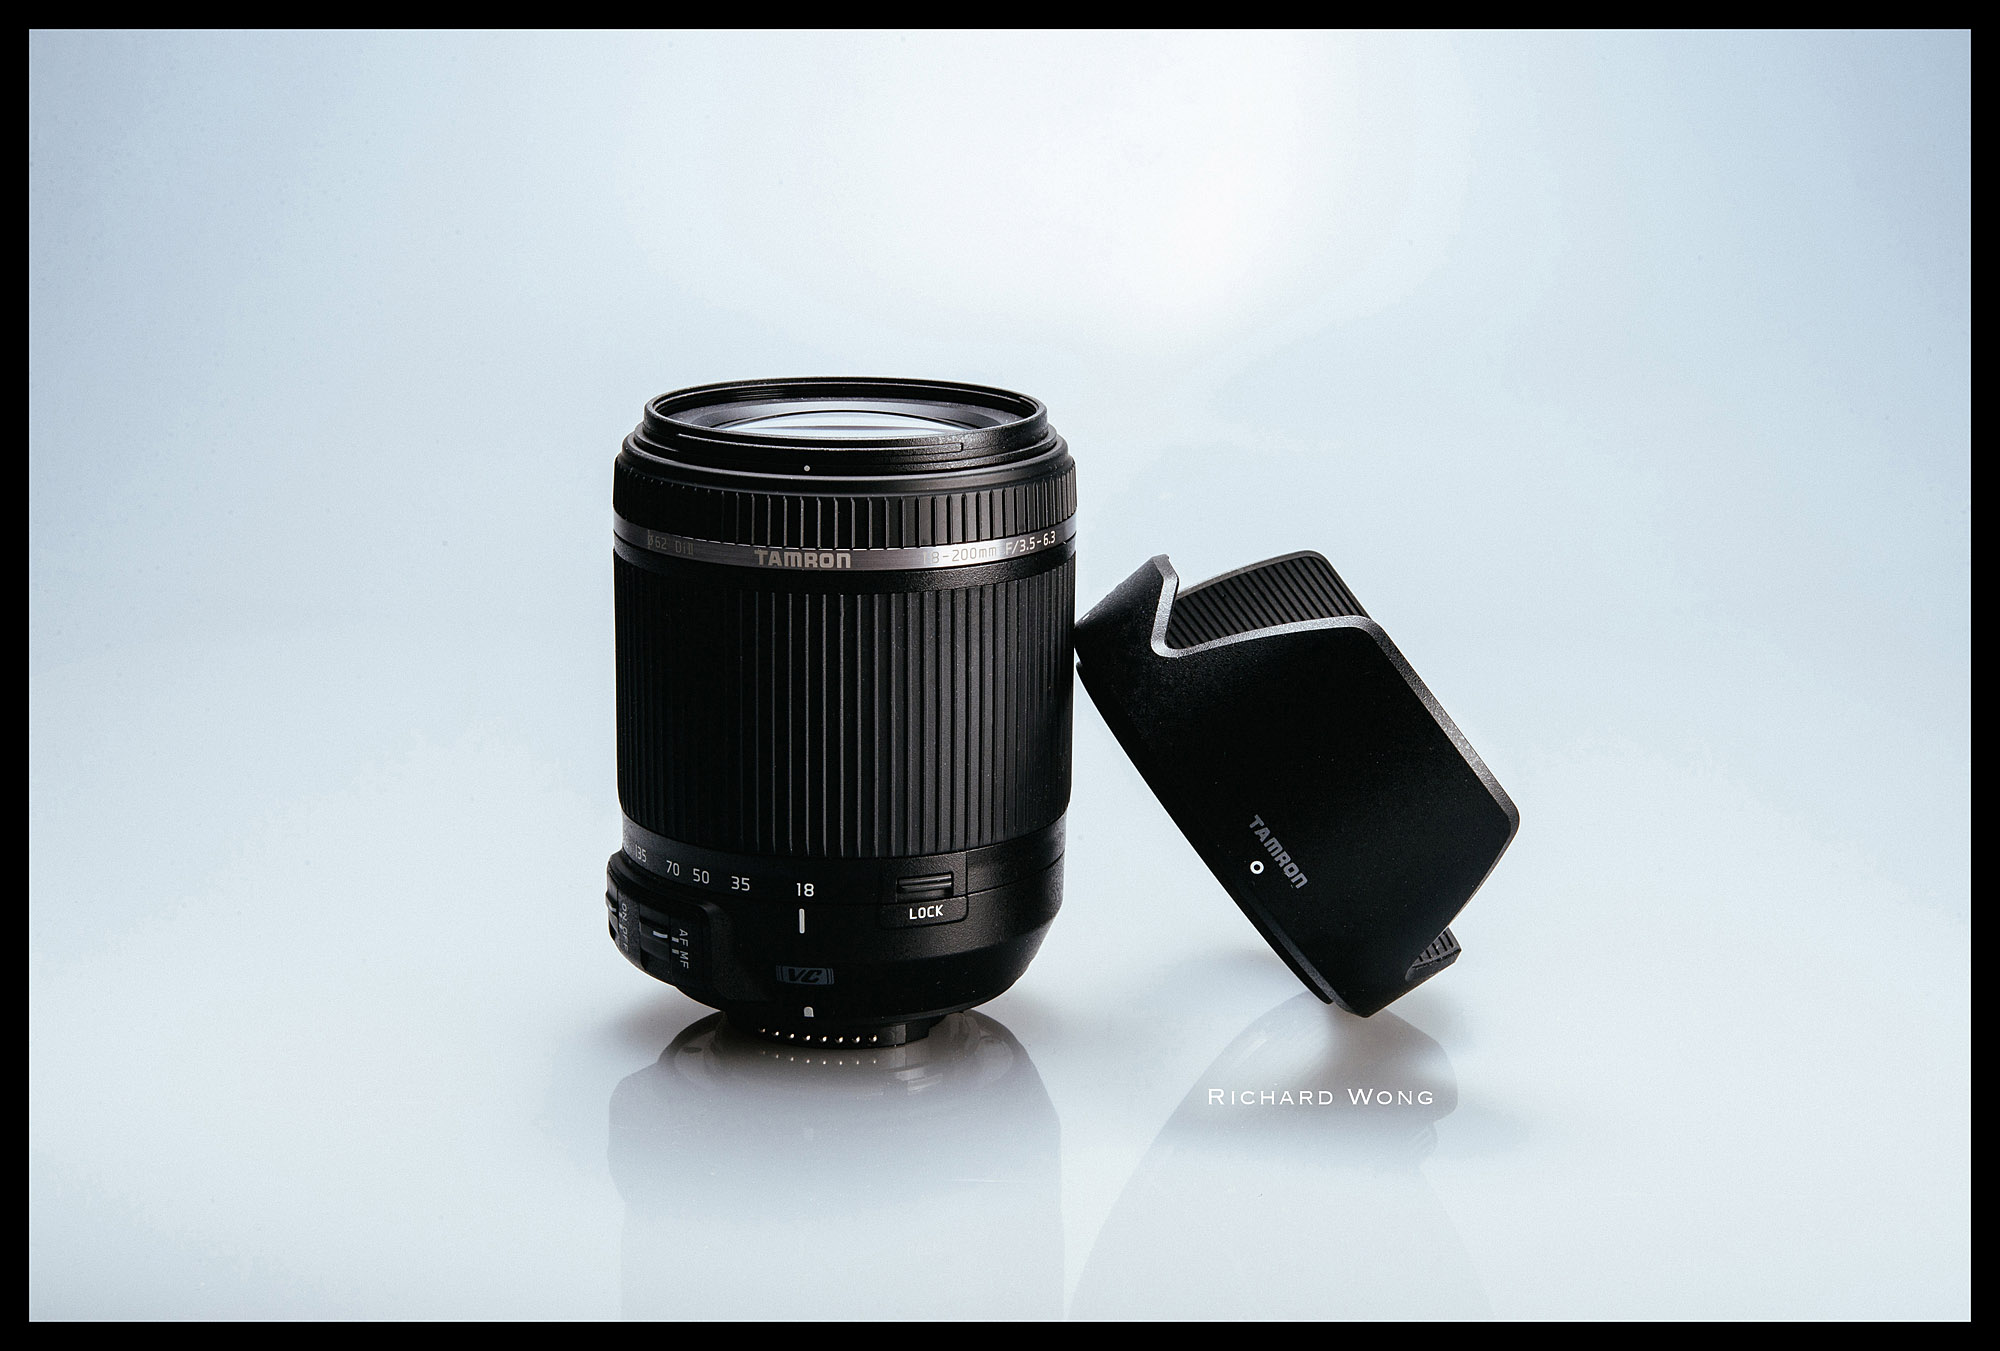 Tamron 18-200mm F/3.5-6.3 Di II VC (Model B018) Review – Review By